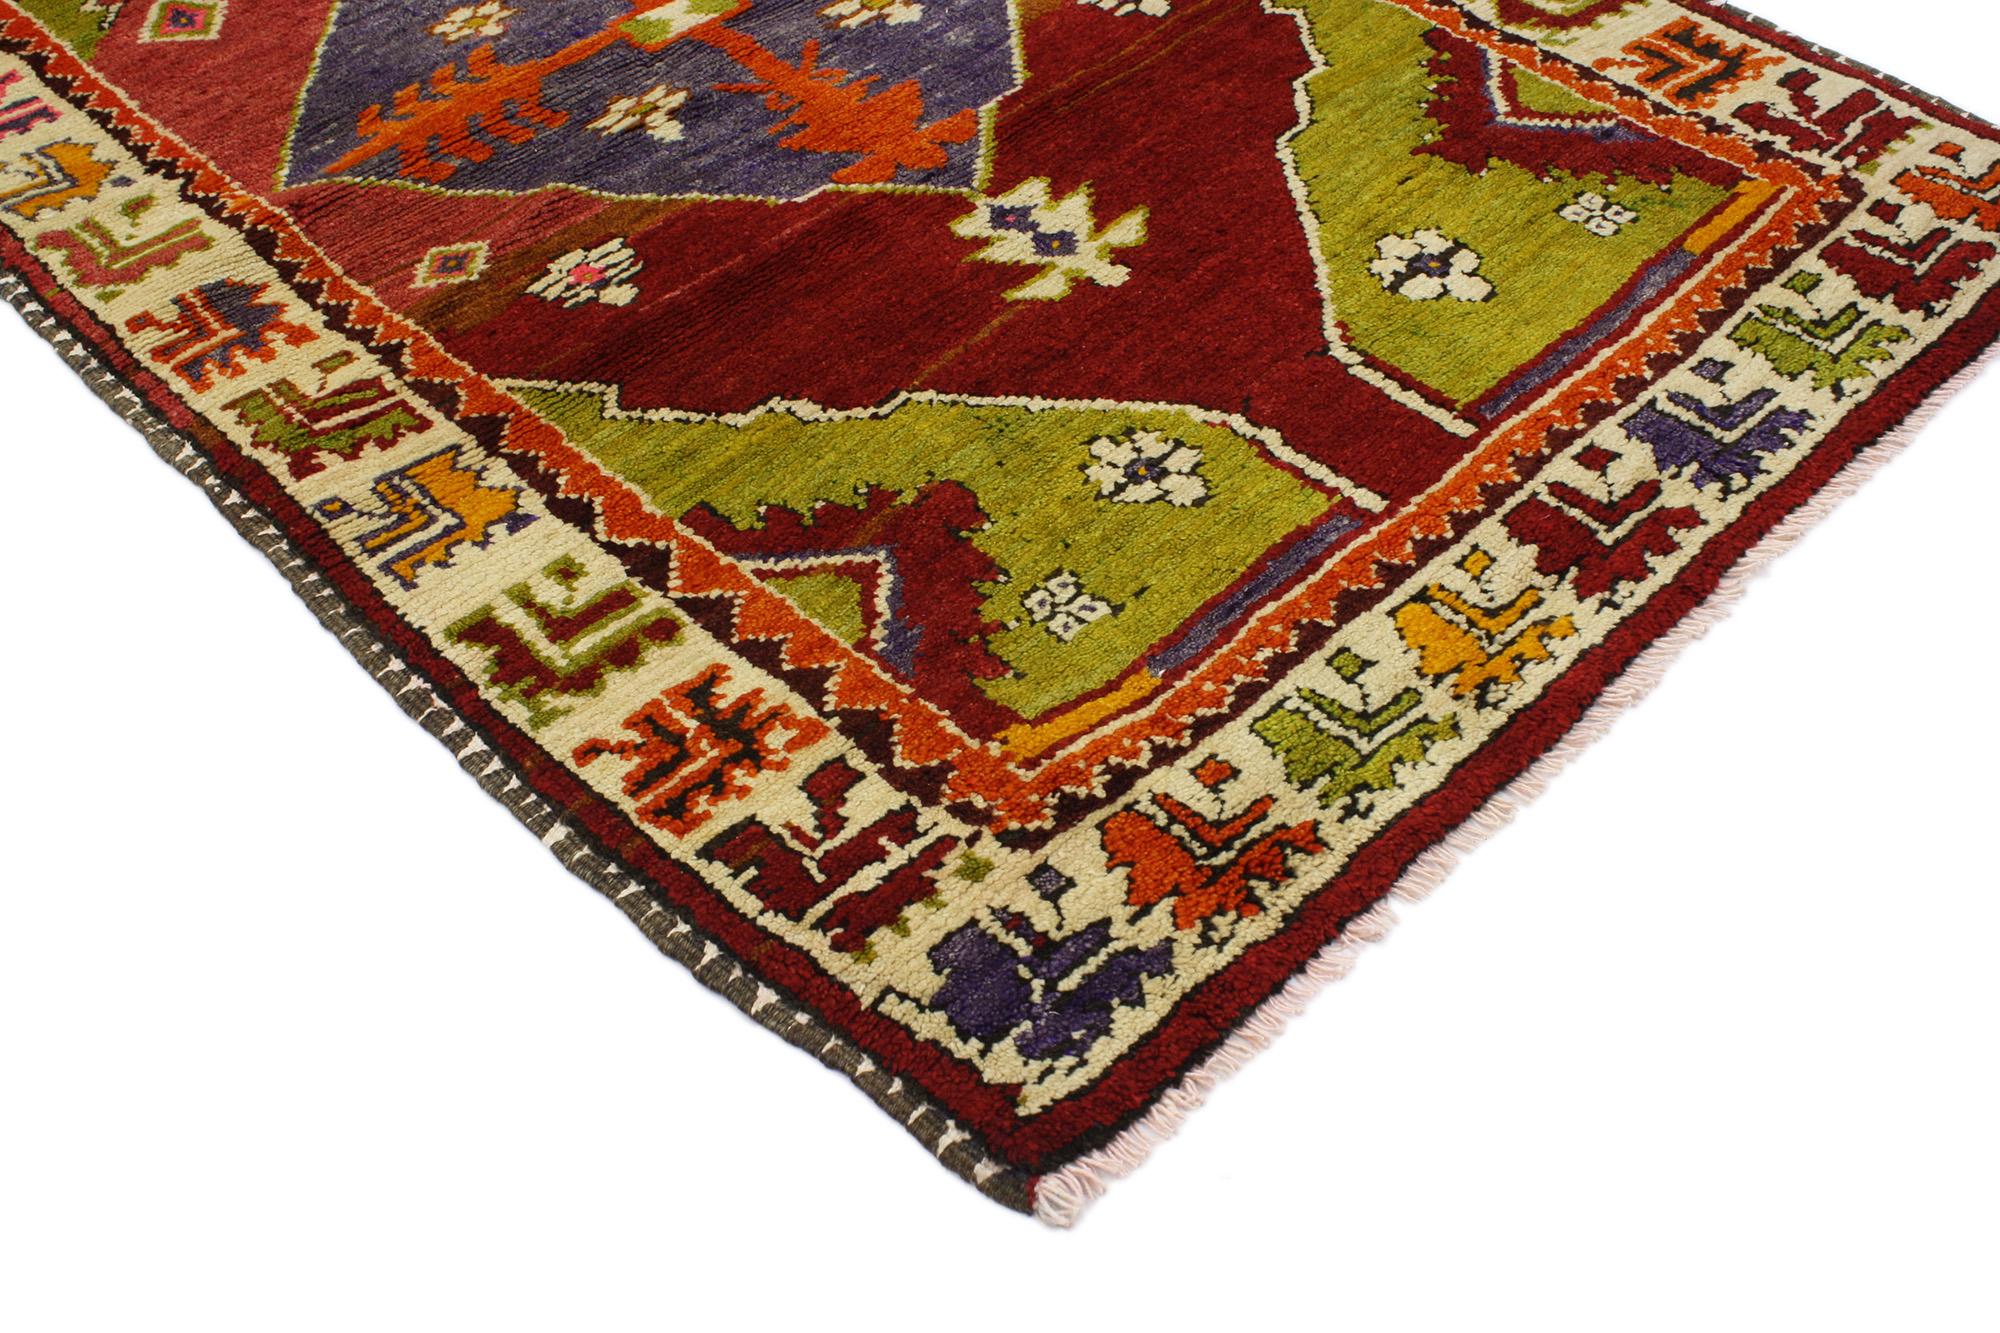 51756 Vintage Turkish Oushak Rug, 02’10 x 04’06. Elevate the ambiance of your home with a touch of fashion-forward energy embodied by this exquisite hand-knotted wool vintage Turkish Oushak rug. From its striking violet-blue center medallion